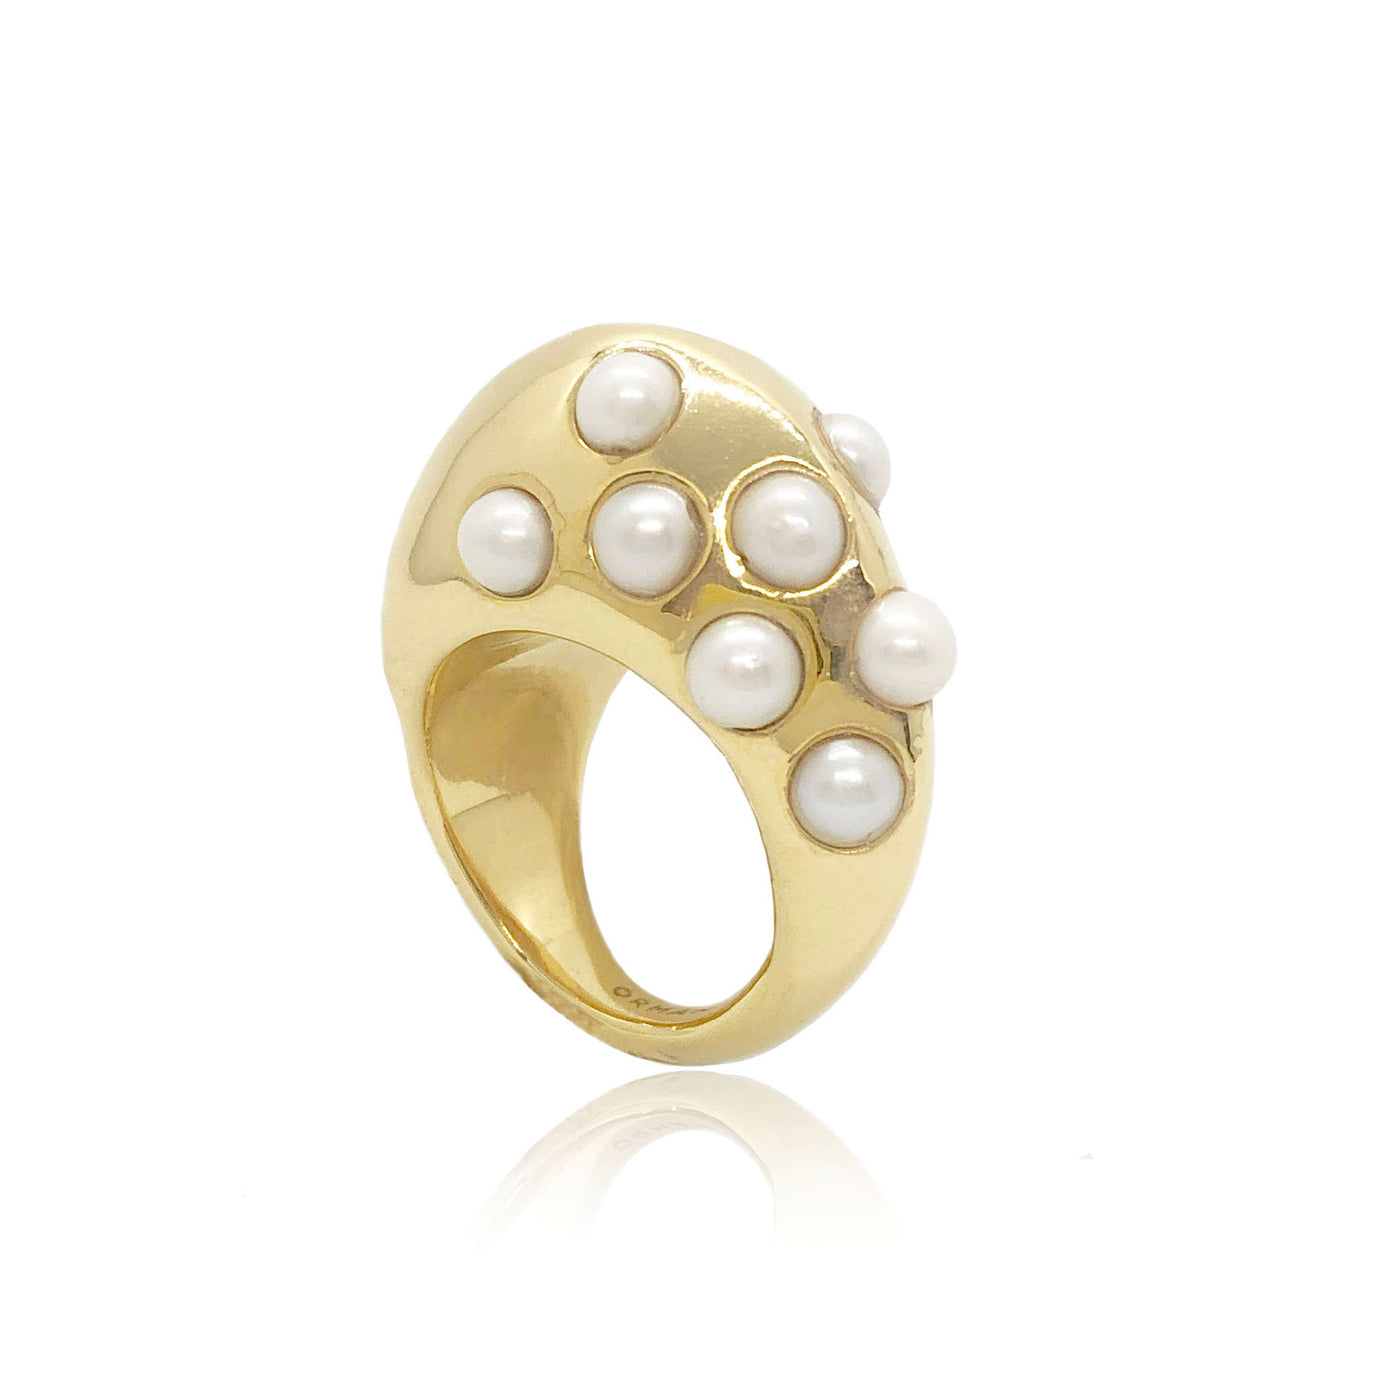 Sculptural gold ring with pearls from Atelier ORMAN